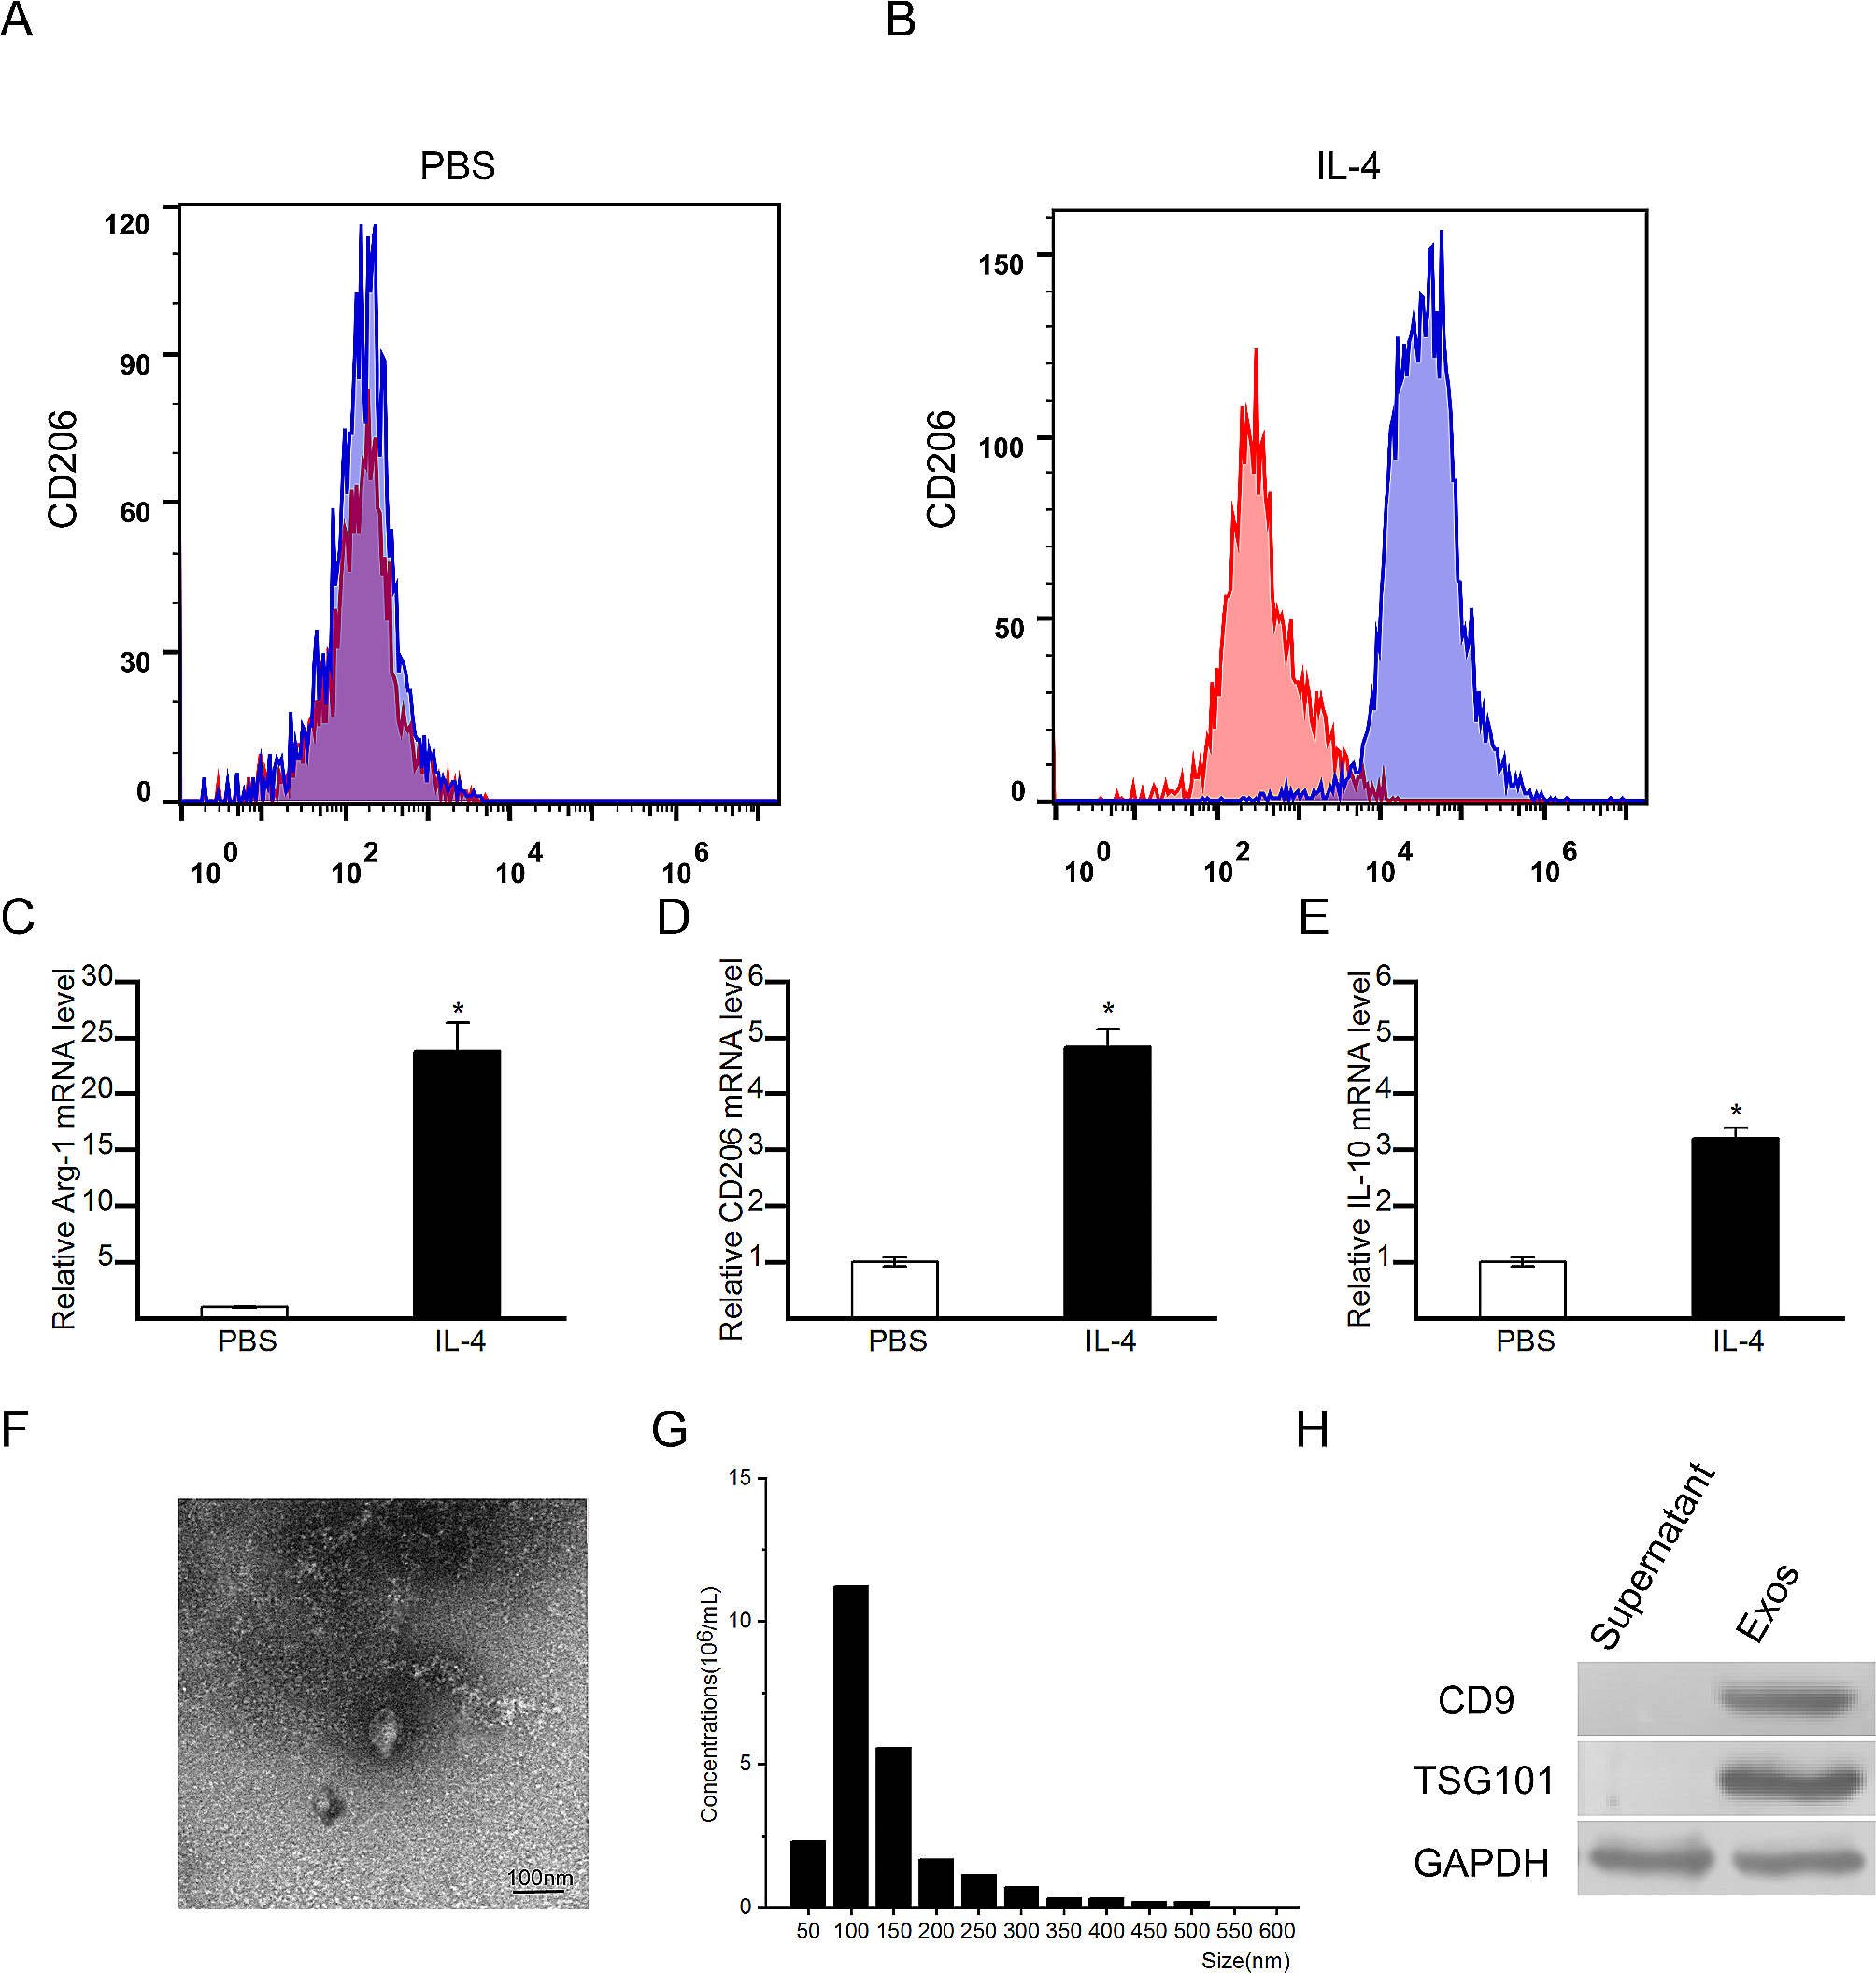 Exosomes derived from M2 macrophages prevent steroid-induced osteonecrosis of the femoral head by modulating inflammation, promoting bone formation and inhibiting bone resorption